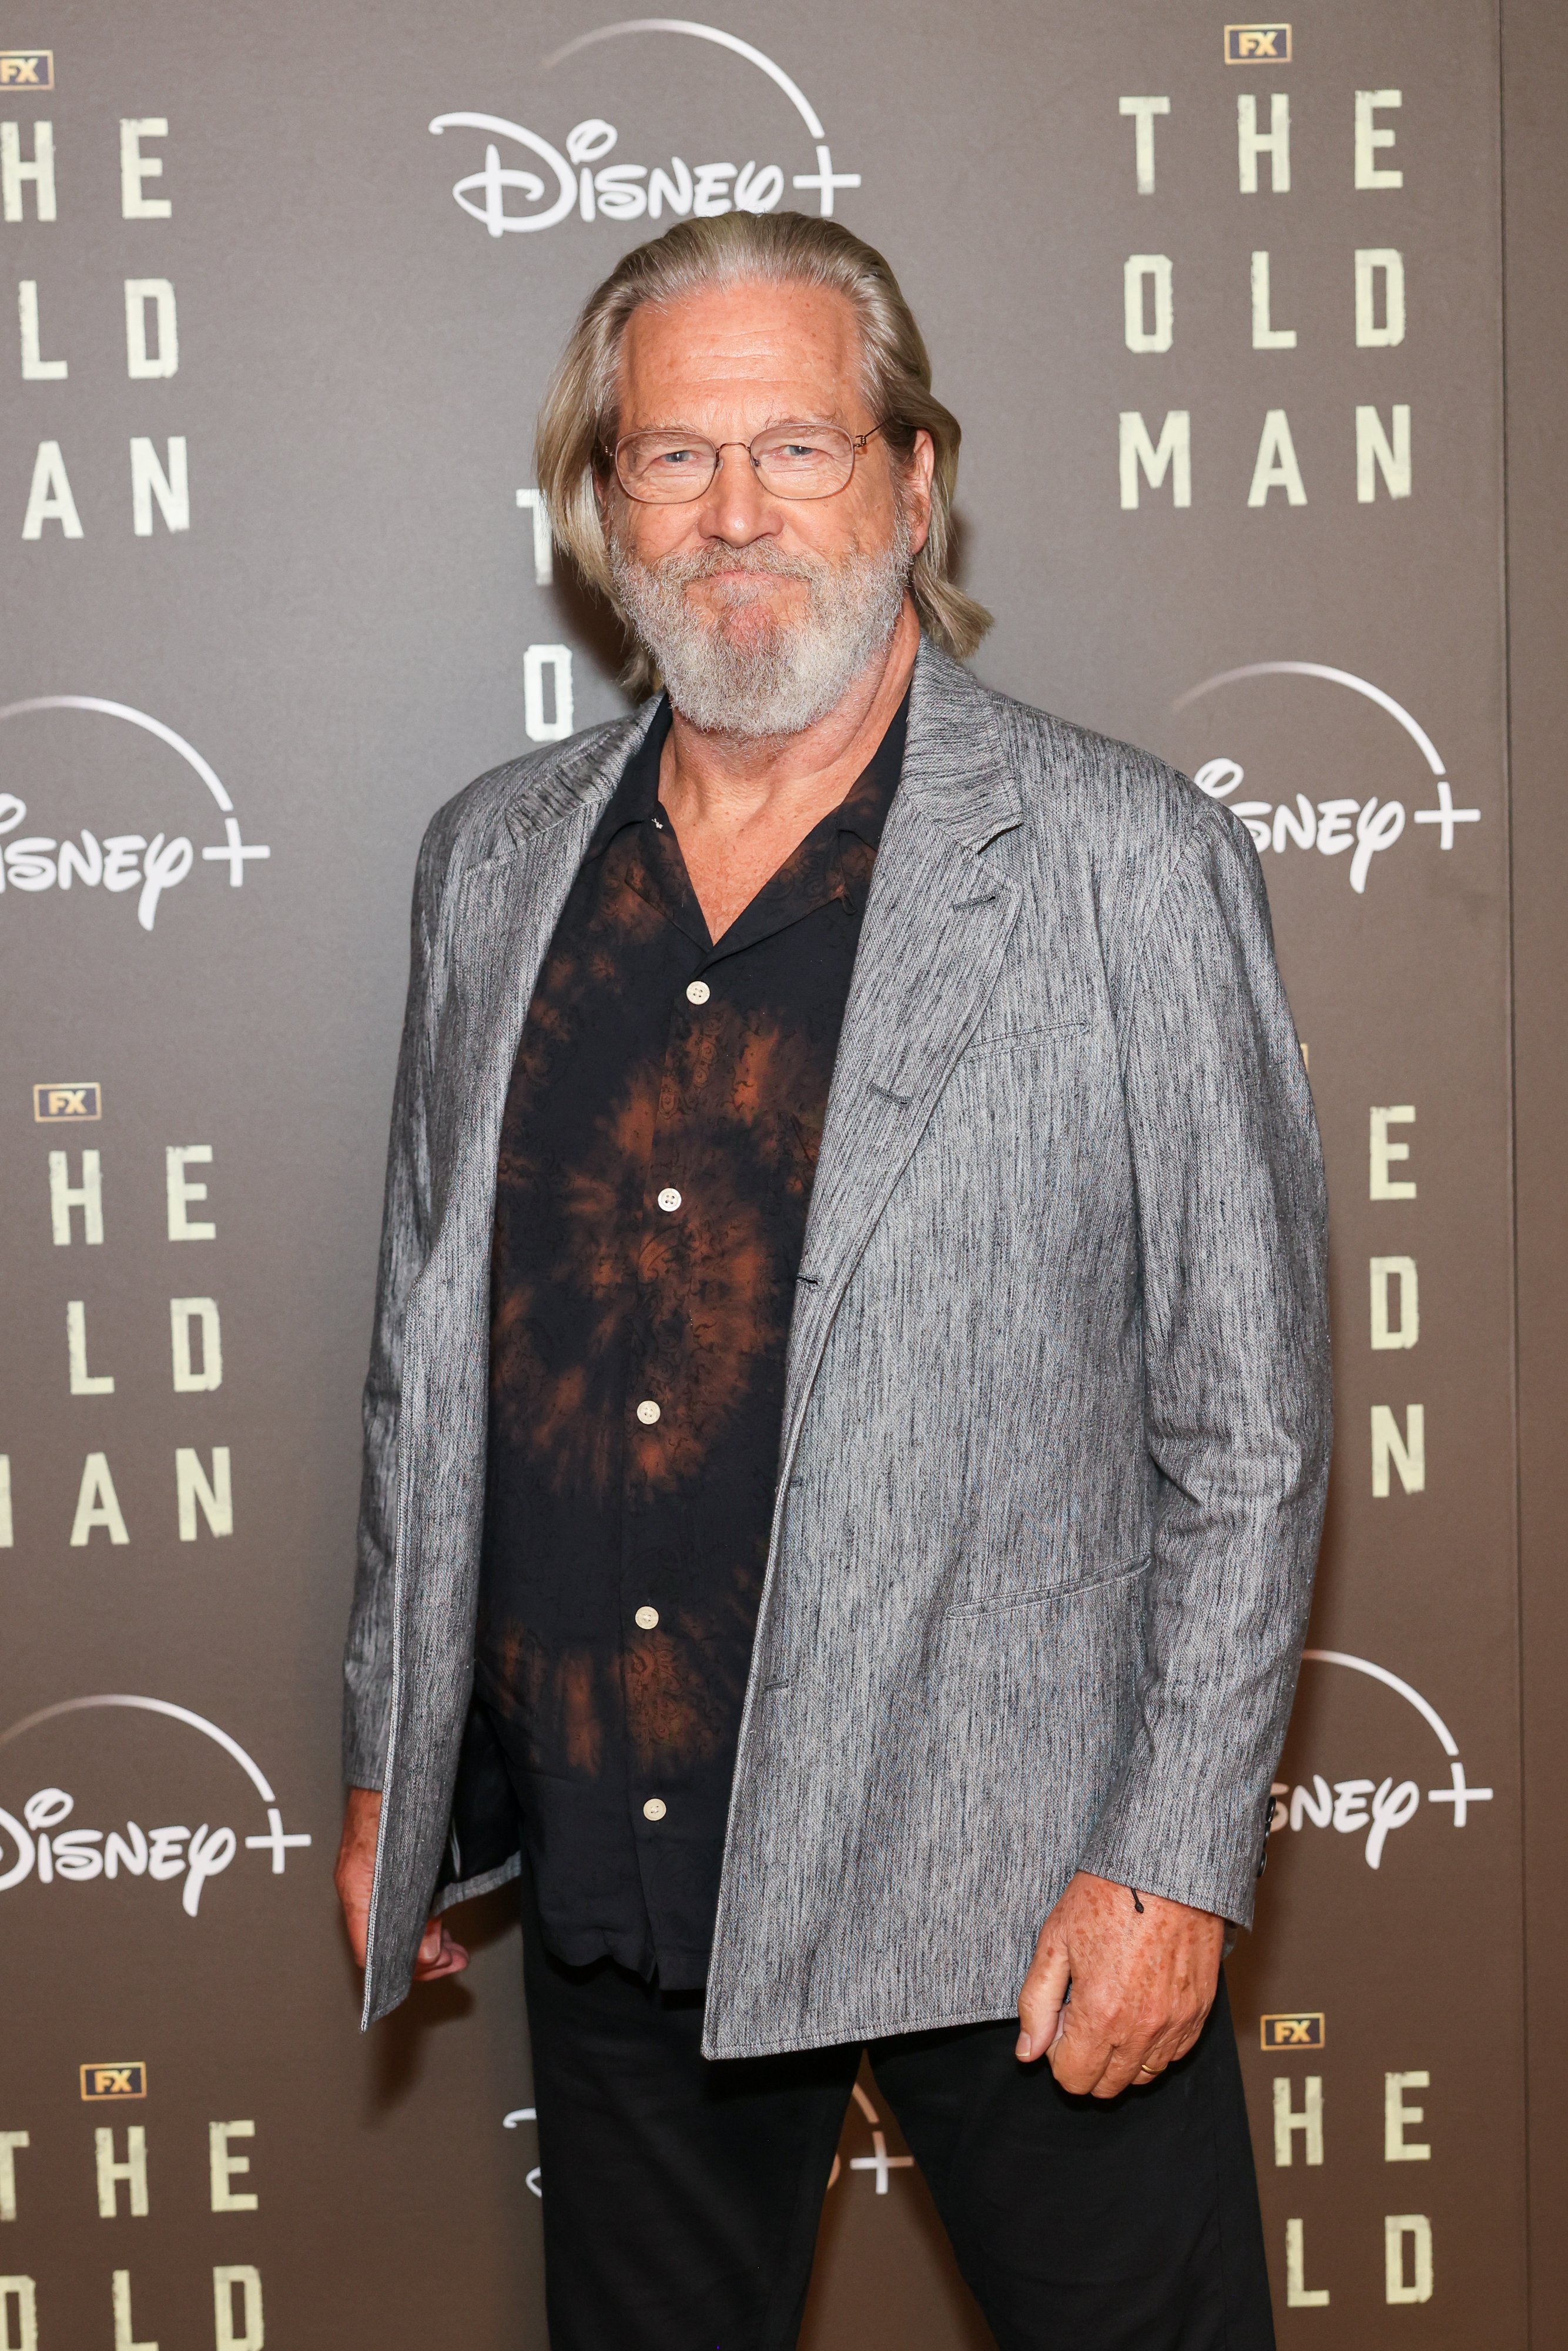 Jeff Bridges at "The Old Man" screening on September 22, 2022, in London, England | Source: Getty Images